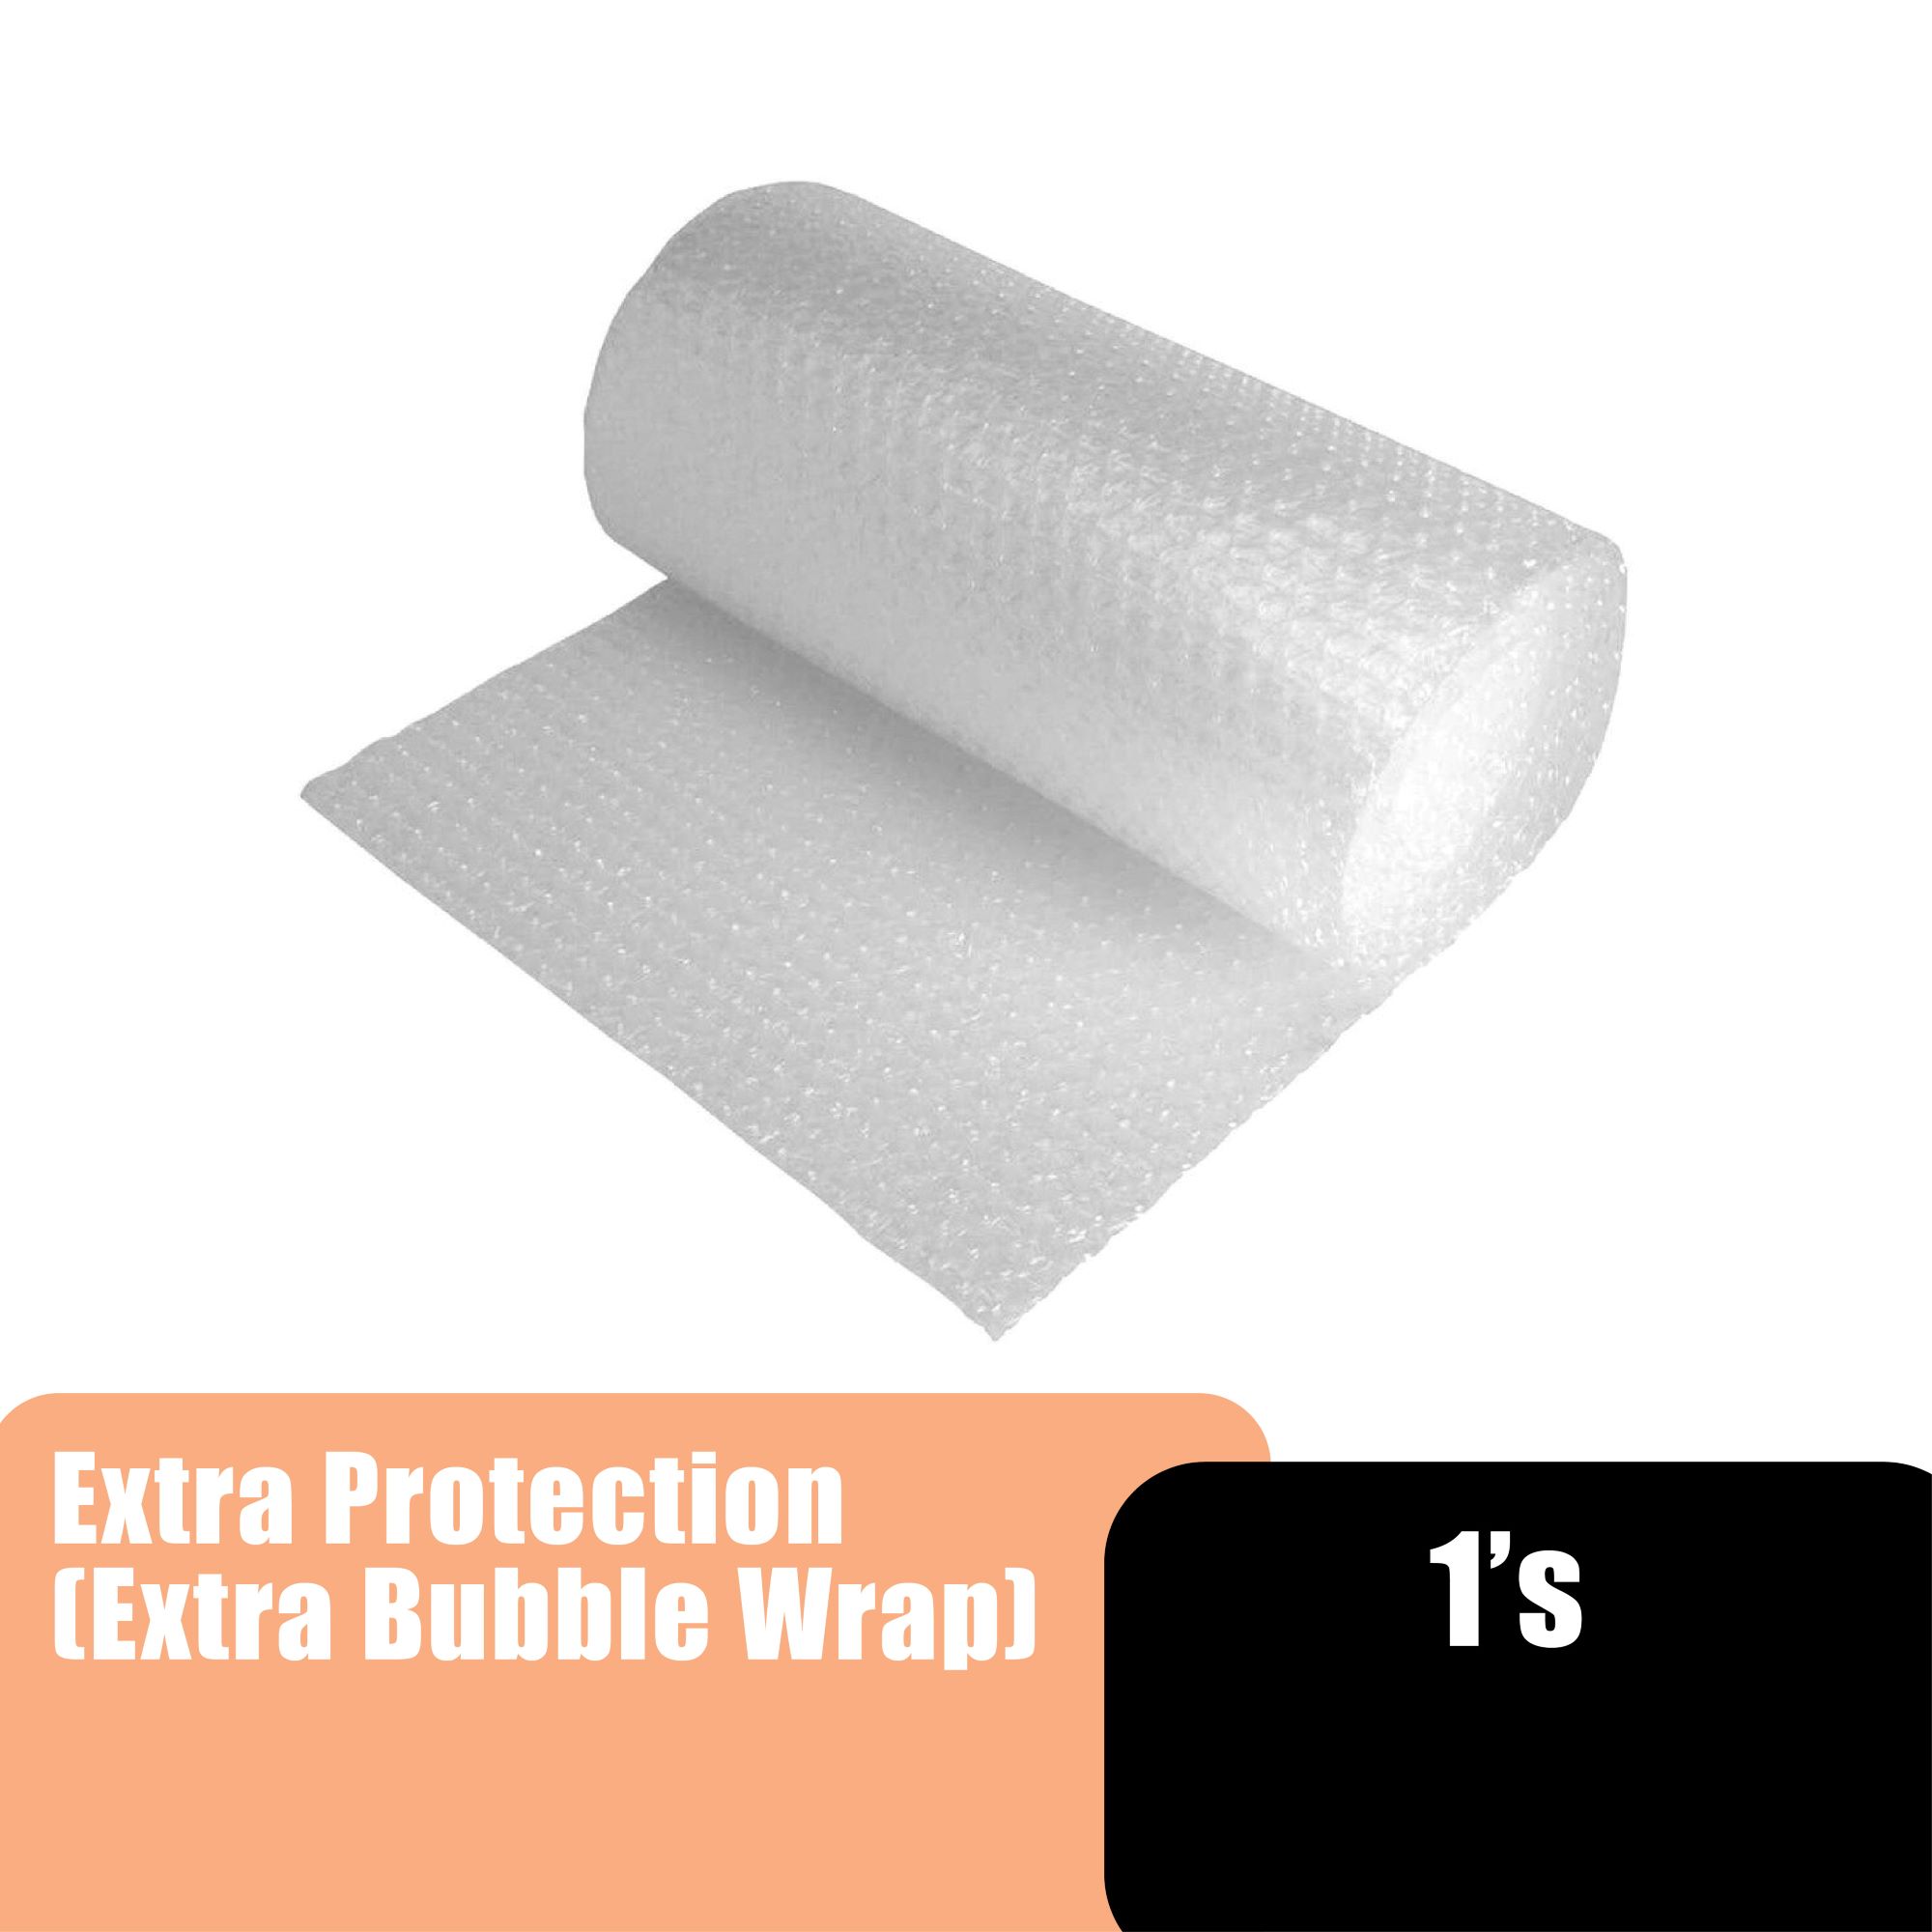 EXTRA PROTECTION(EXTRA BUBBLE WRAP PROTECTION)